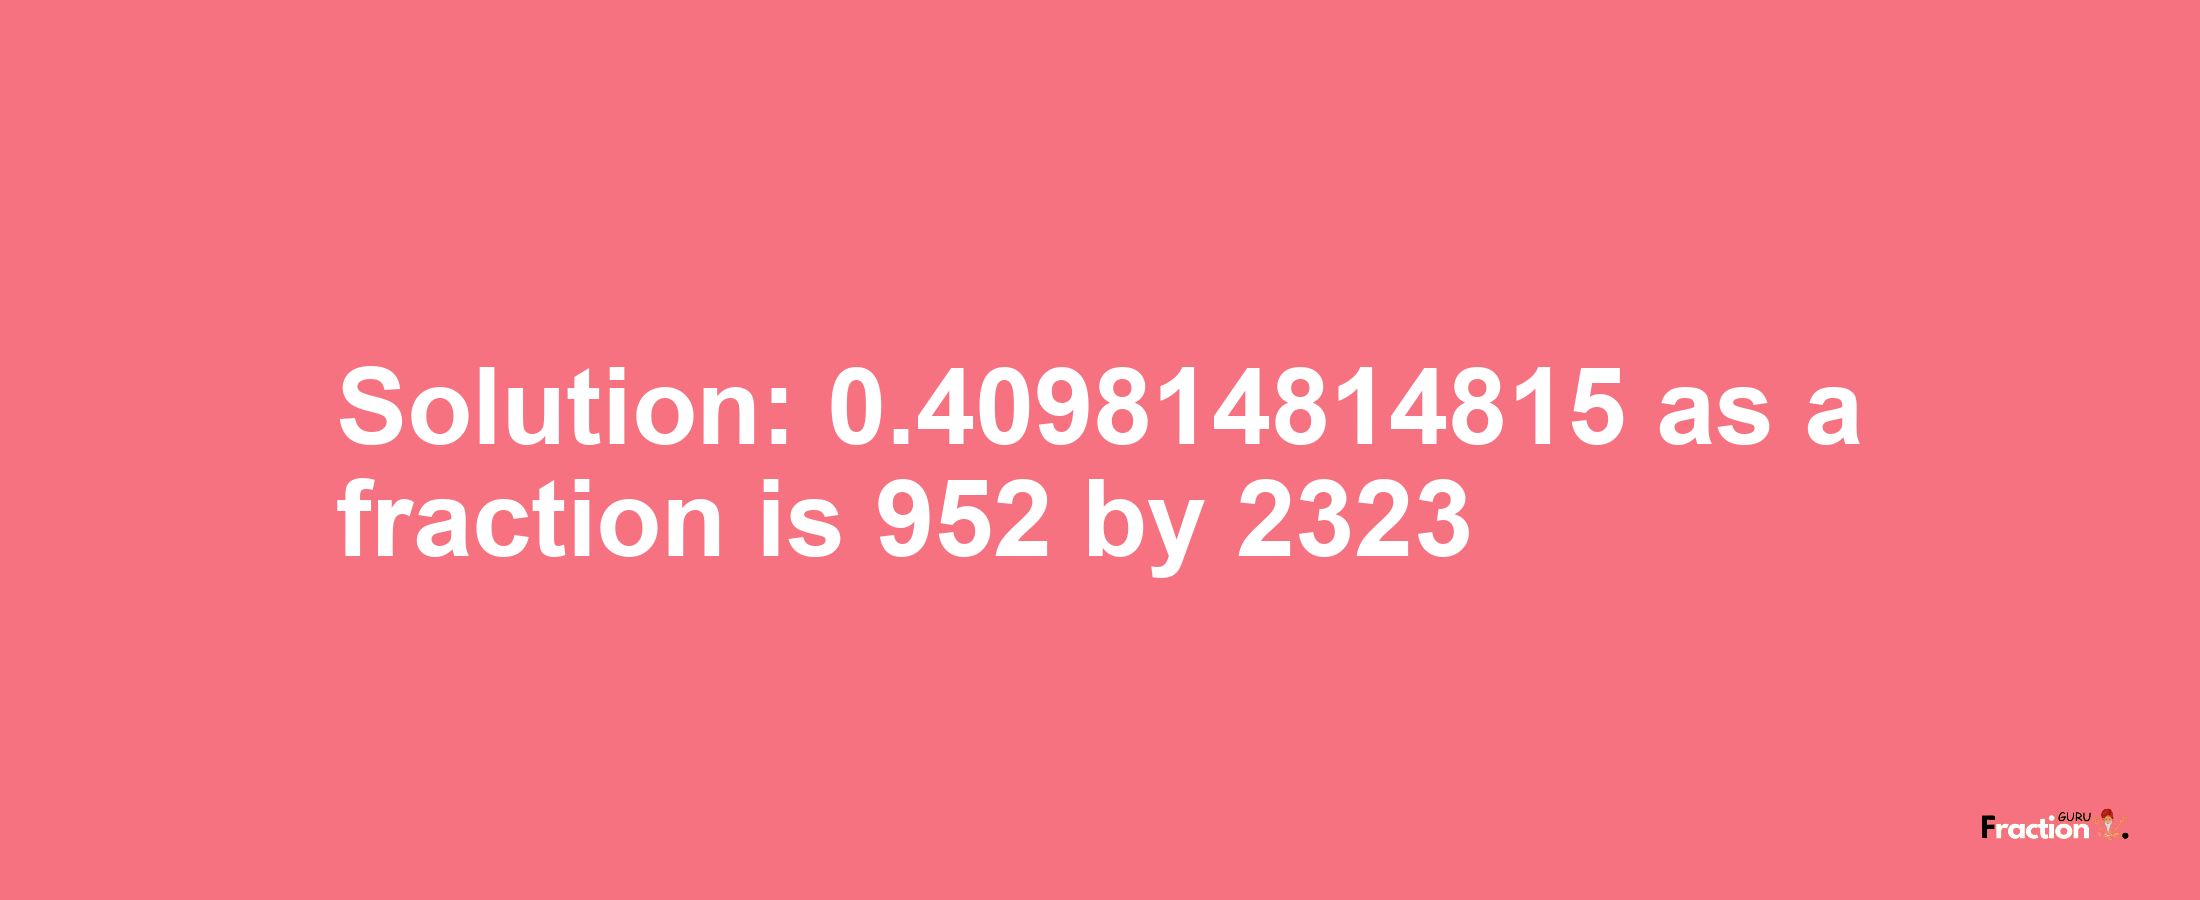 Solution:0.409814814815 as a fraction is 952/2323